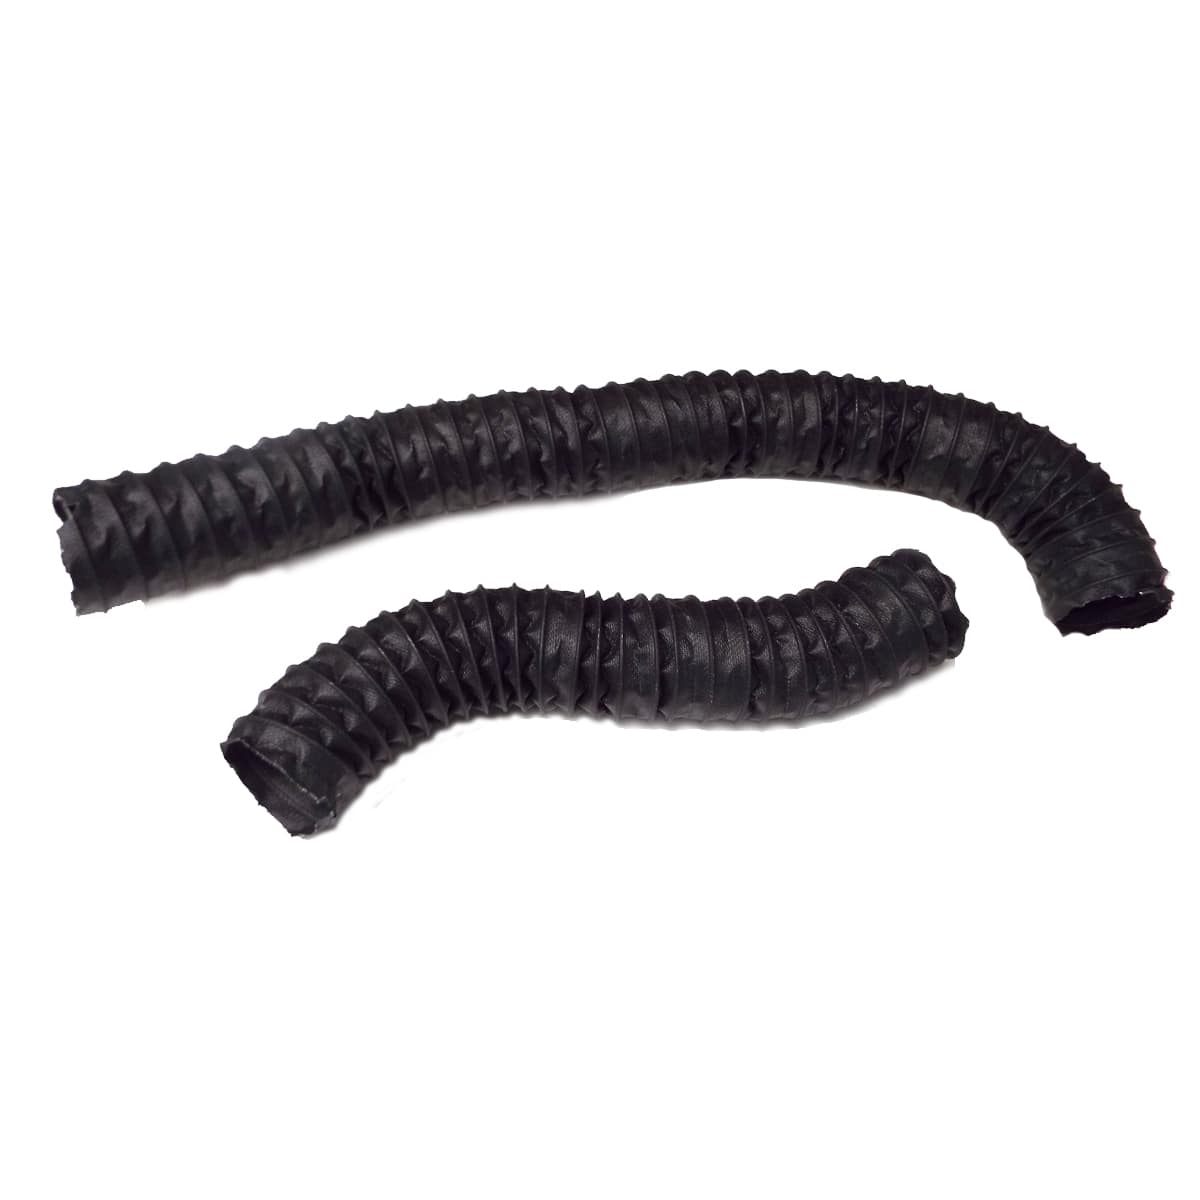 1954-1966 Heater Defroster Tubing Deluxe or Standard Heater Cloth as Original Chevrolet and GMC Pickup Truck